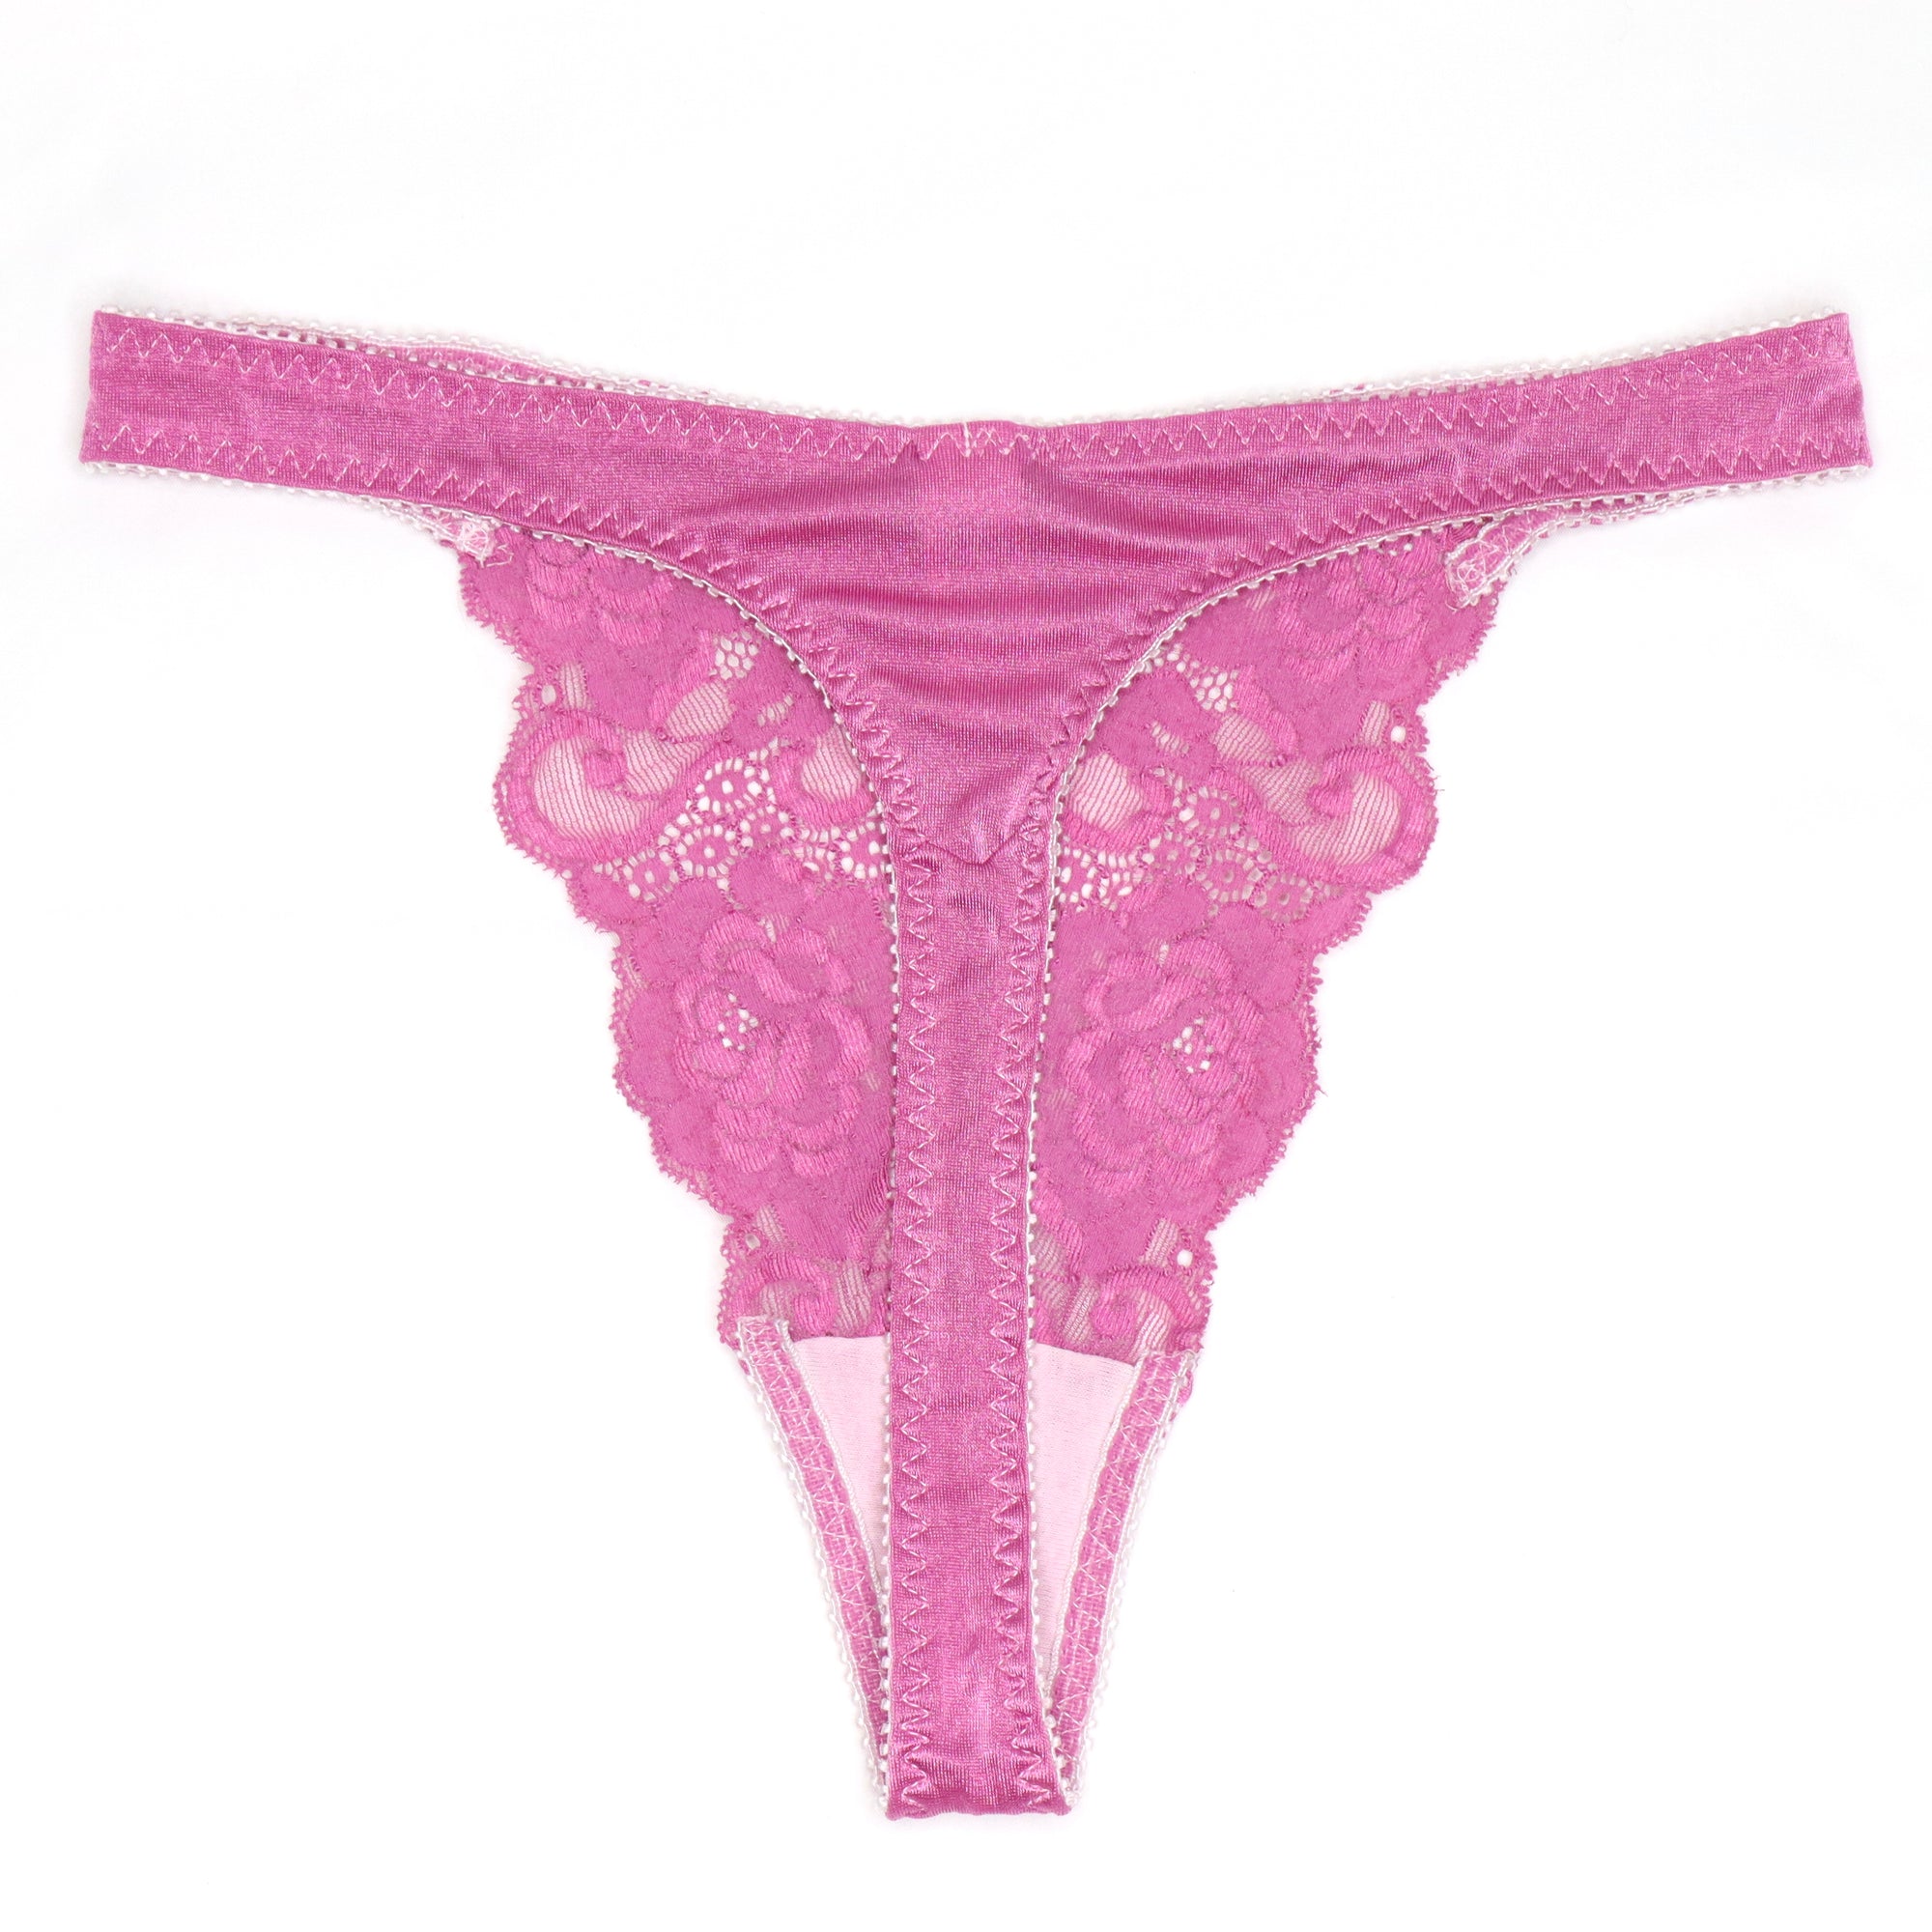 Vintage 90s Christian Dior Hand Dyed Berry Pink Lace Thong Panties